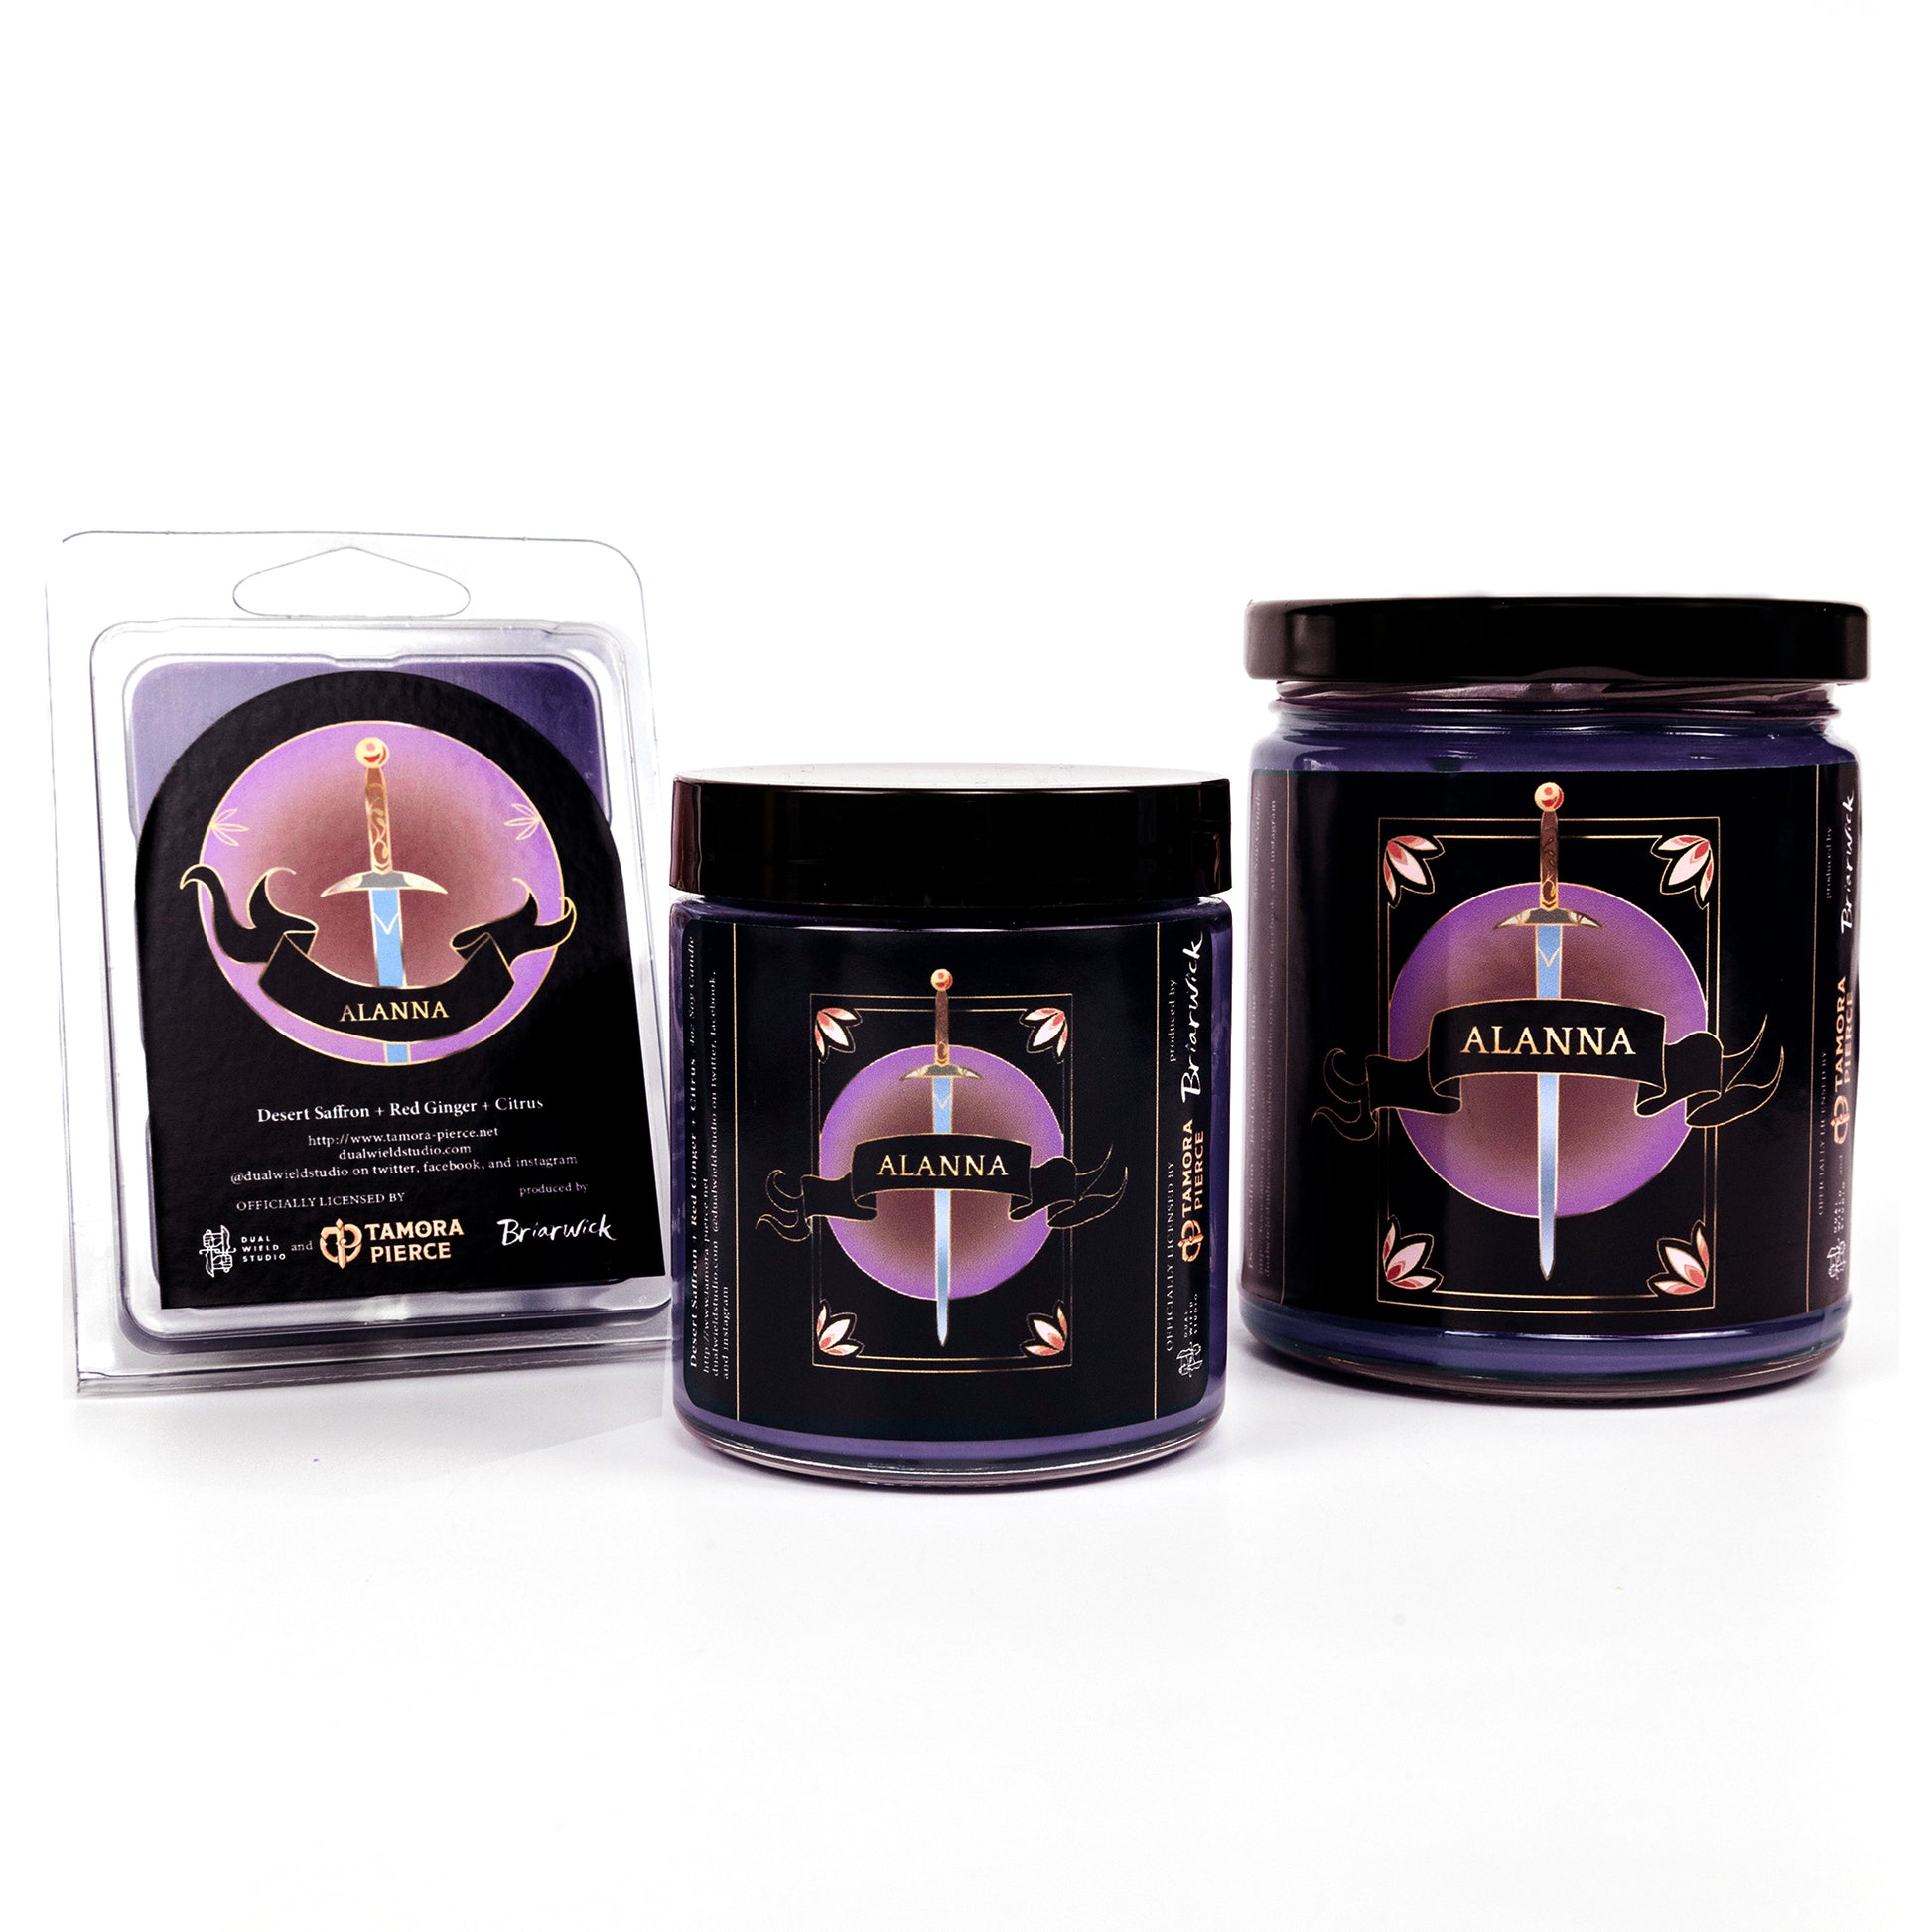 Full set of both Alanna candles and the wax melts, all with purple wax. The label is a sword at rest, with a ribbon reading "Alanna" across the center.